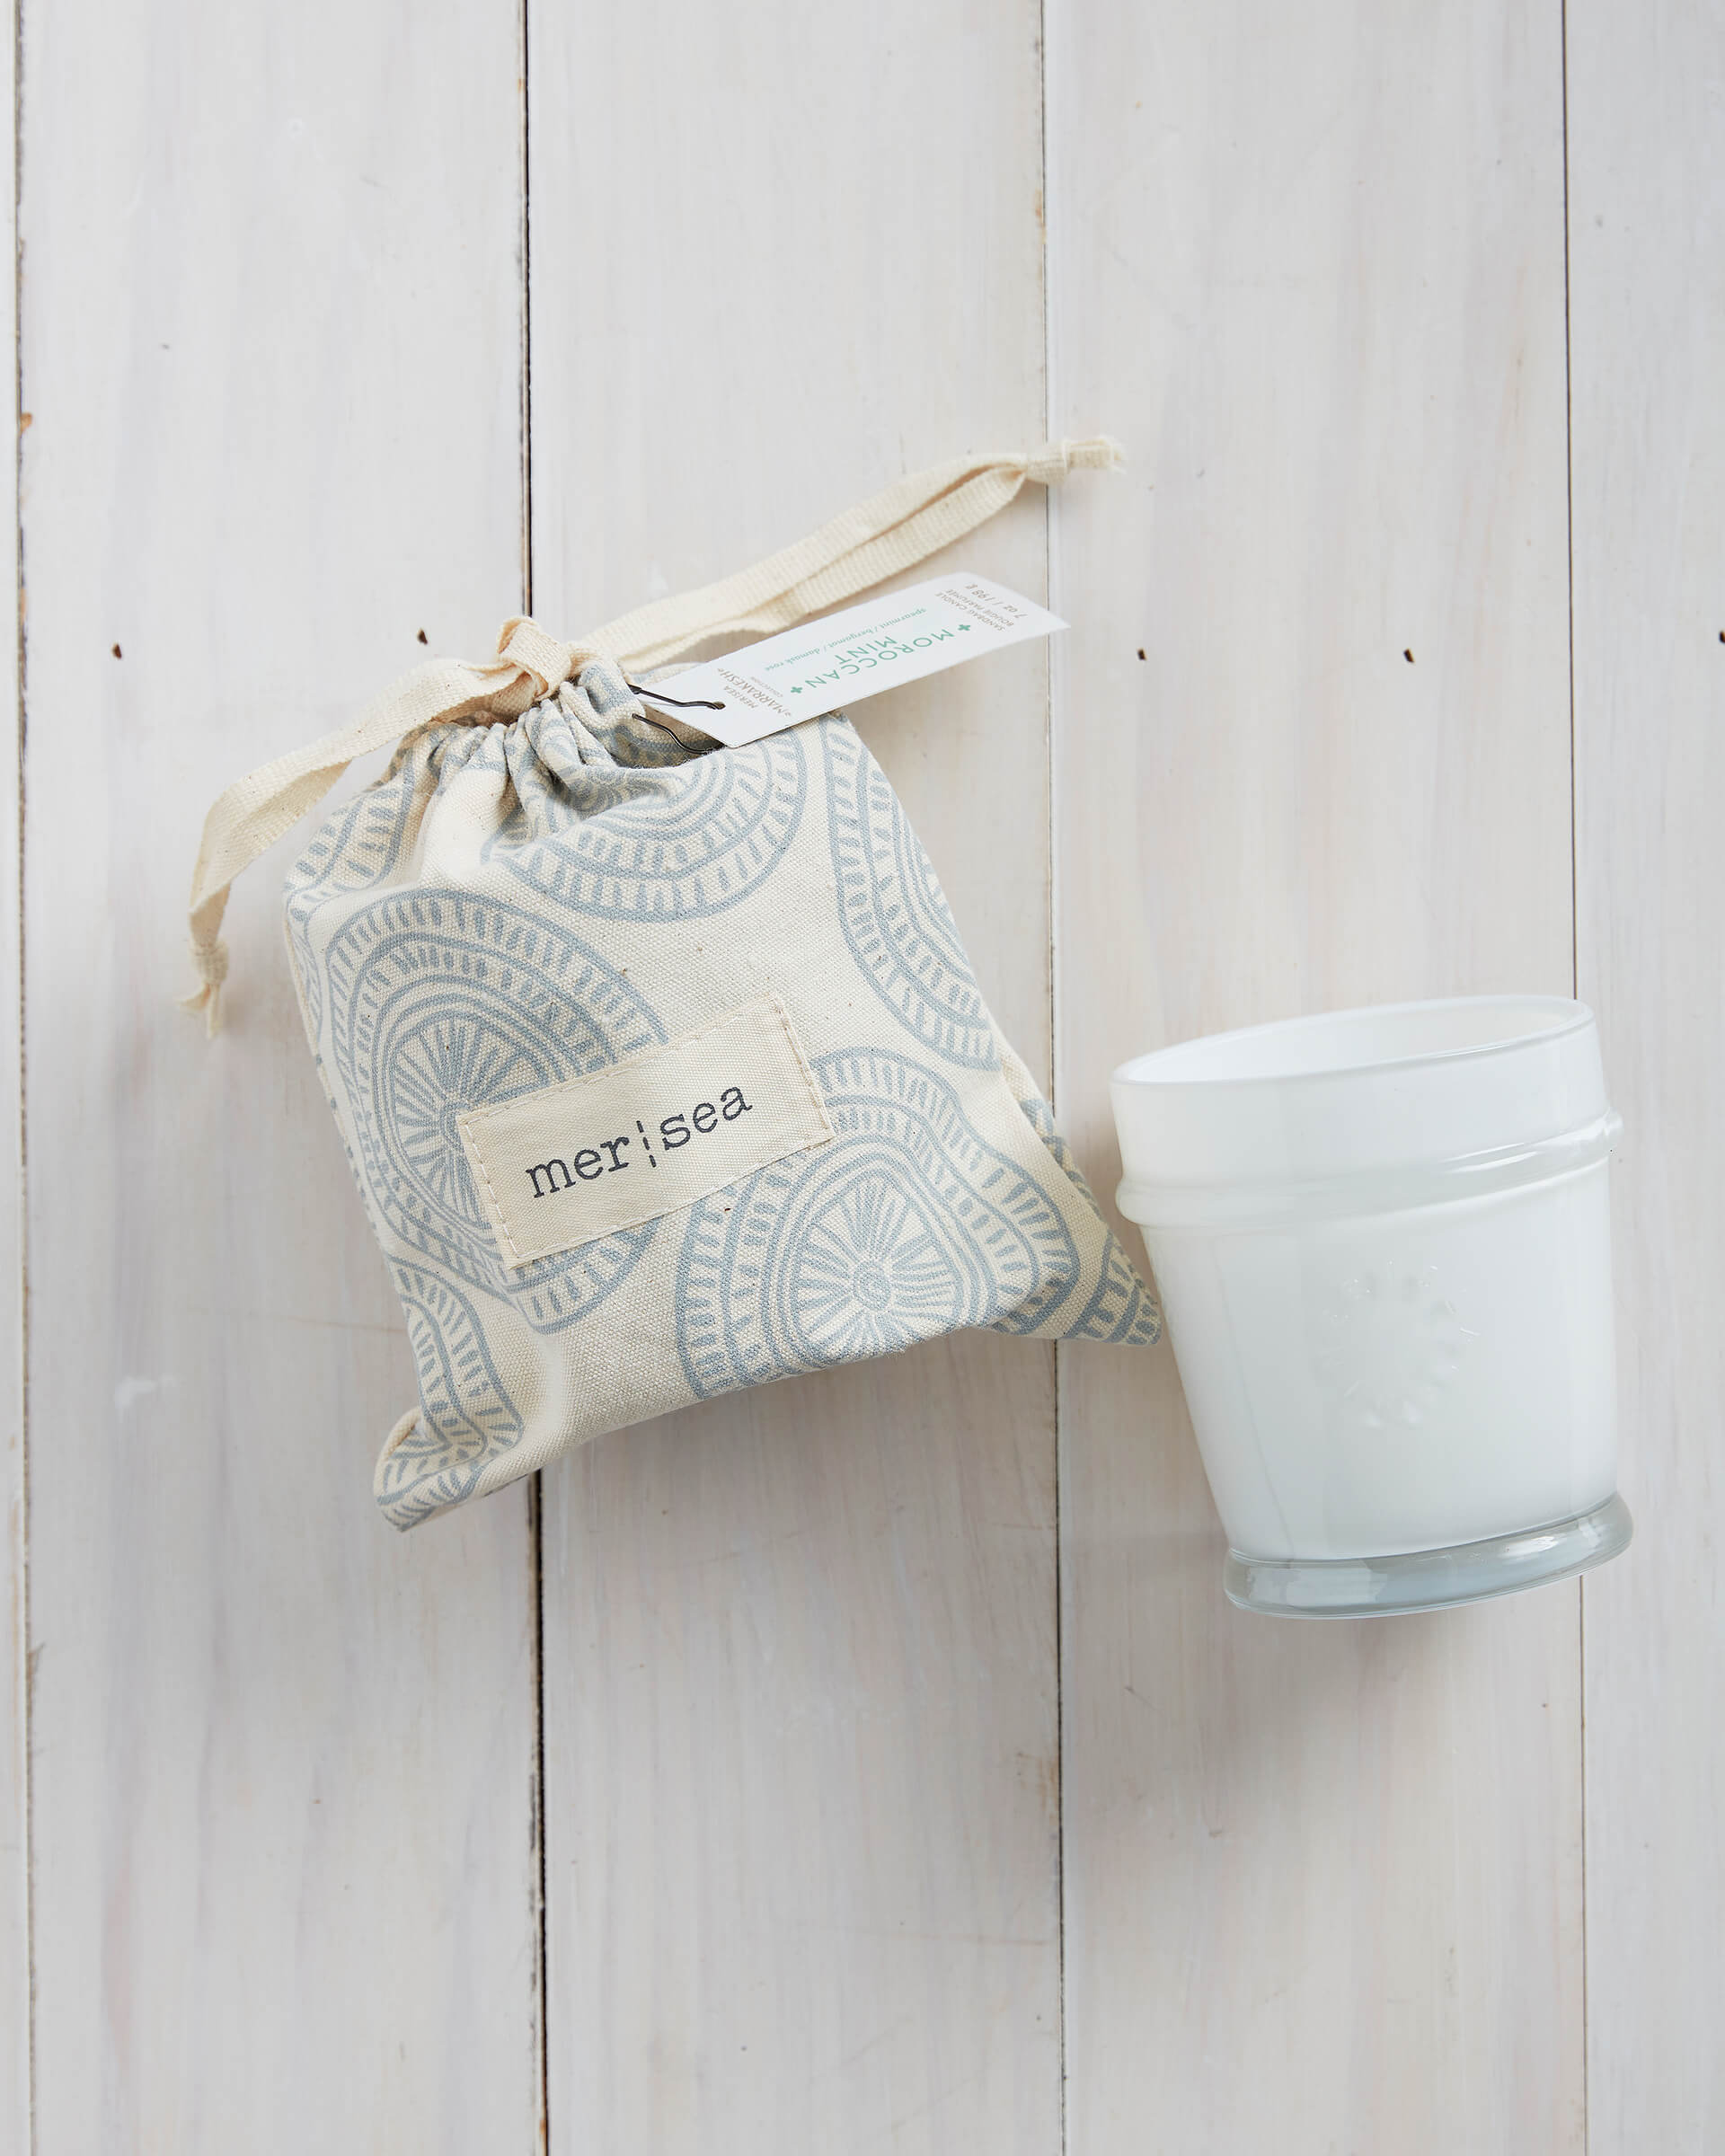 6.5 oz Moroccan Mint sandbag candle in white bag with blue design on a white wood background